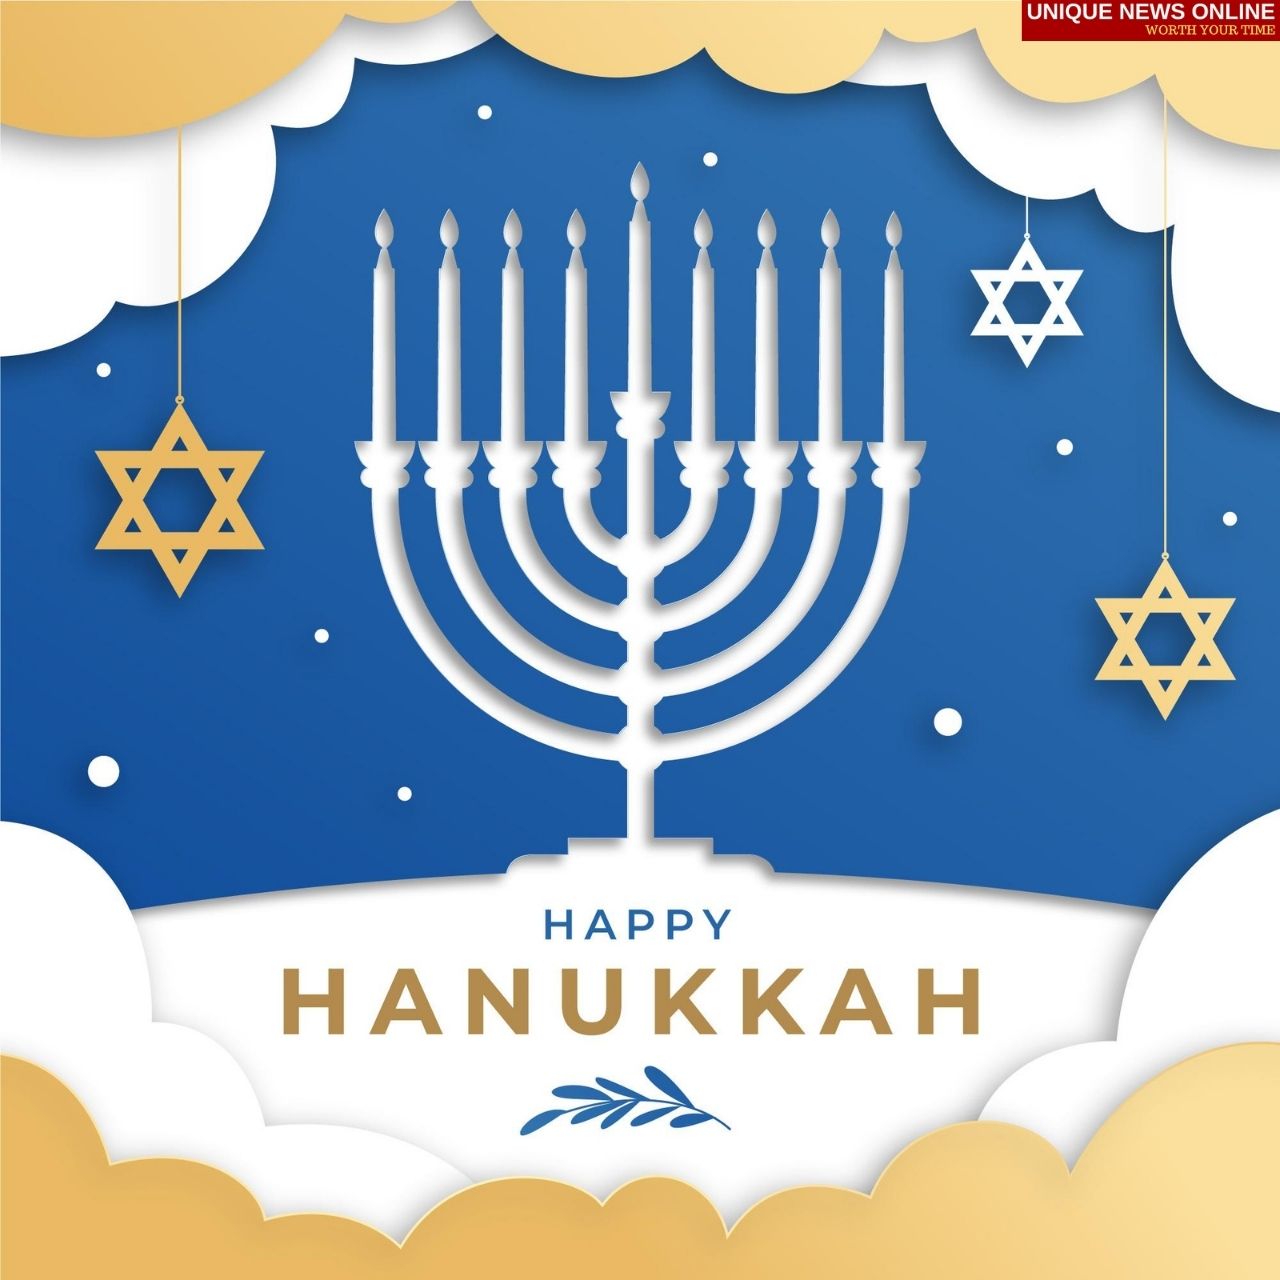 Hanukkah 2021 Instagram Captions, WhatsApp Status, Facebook Messages, Twitter Posts, and Messages to Share